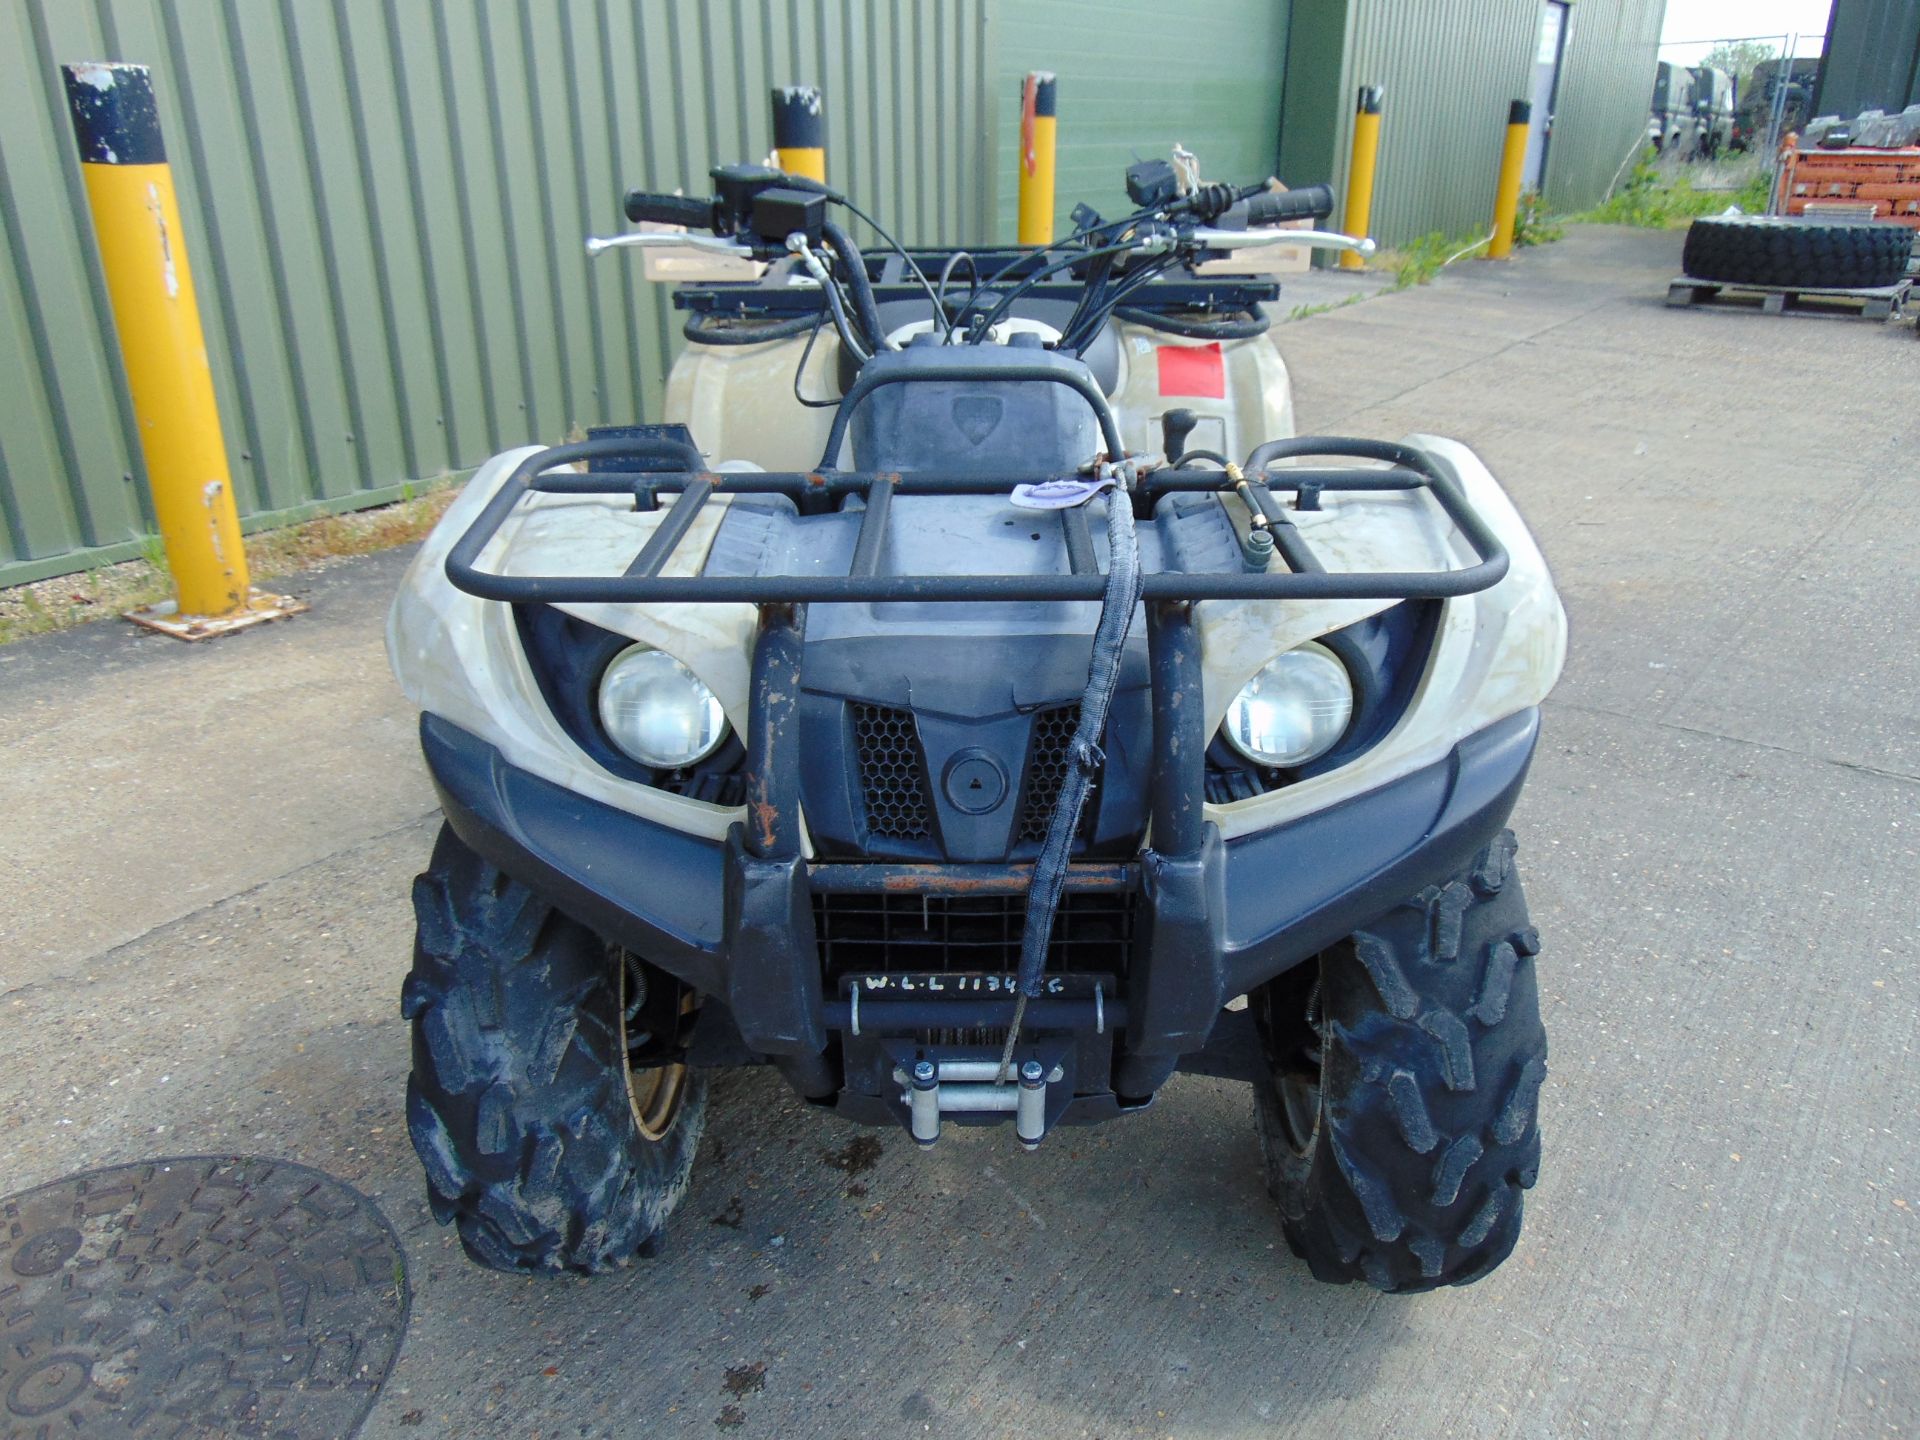 Military Specification Yamaha Grizzly 450 4 x 4 ATV Quad Bike Showing 223 hrs - Image 3 of 23